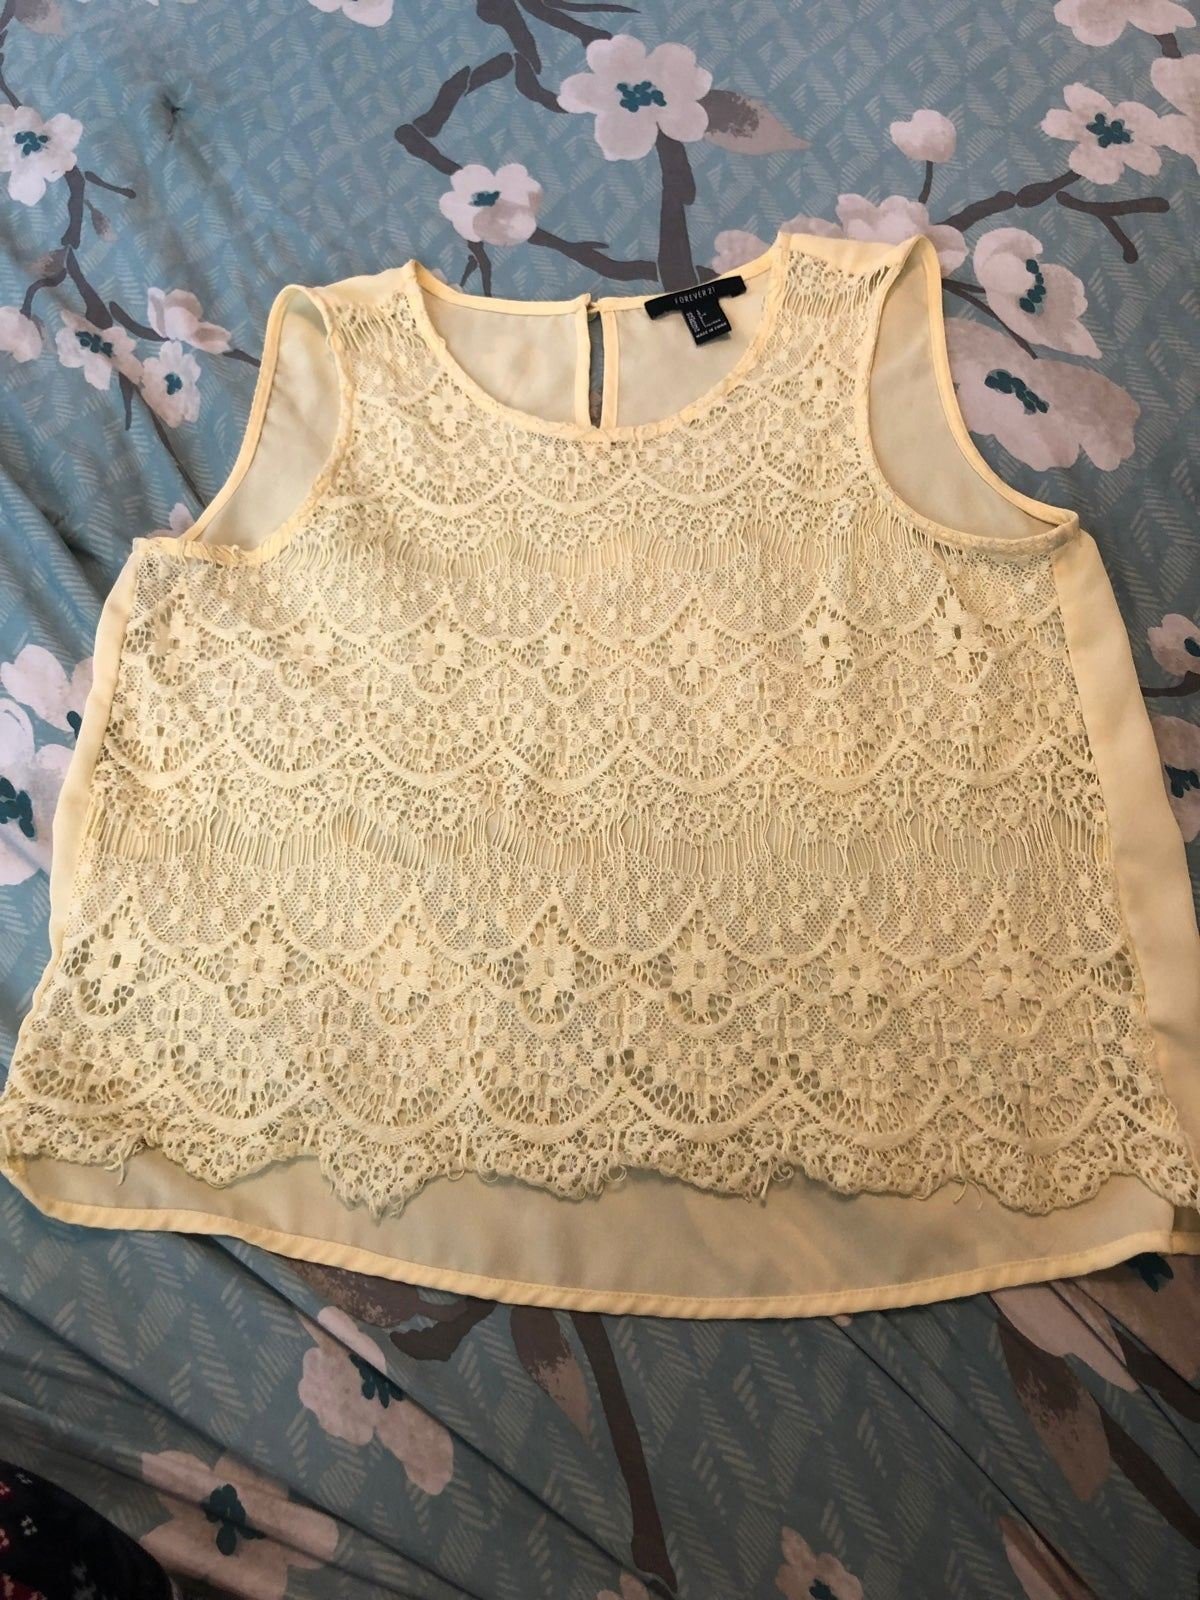 where to buy  Forever 21 large yellow top G9yus4Pn8 Low